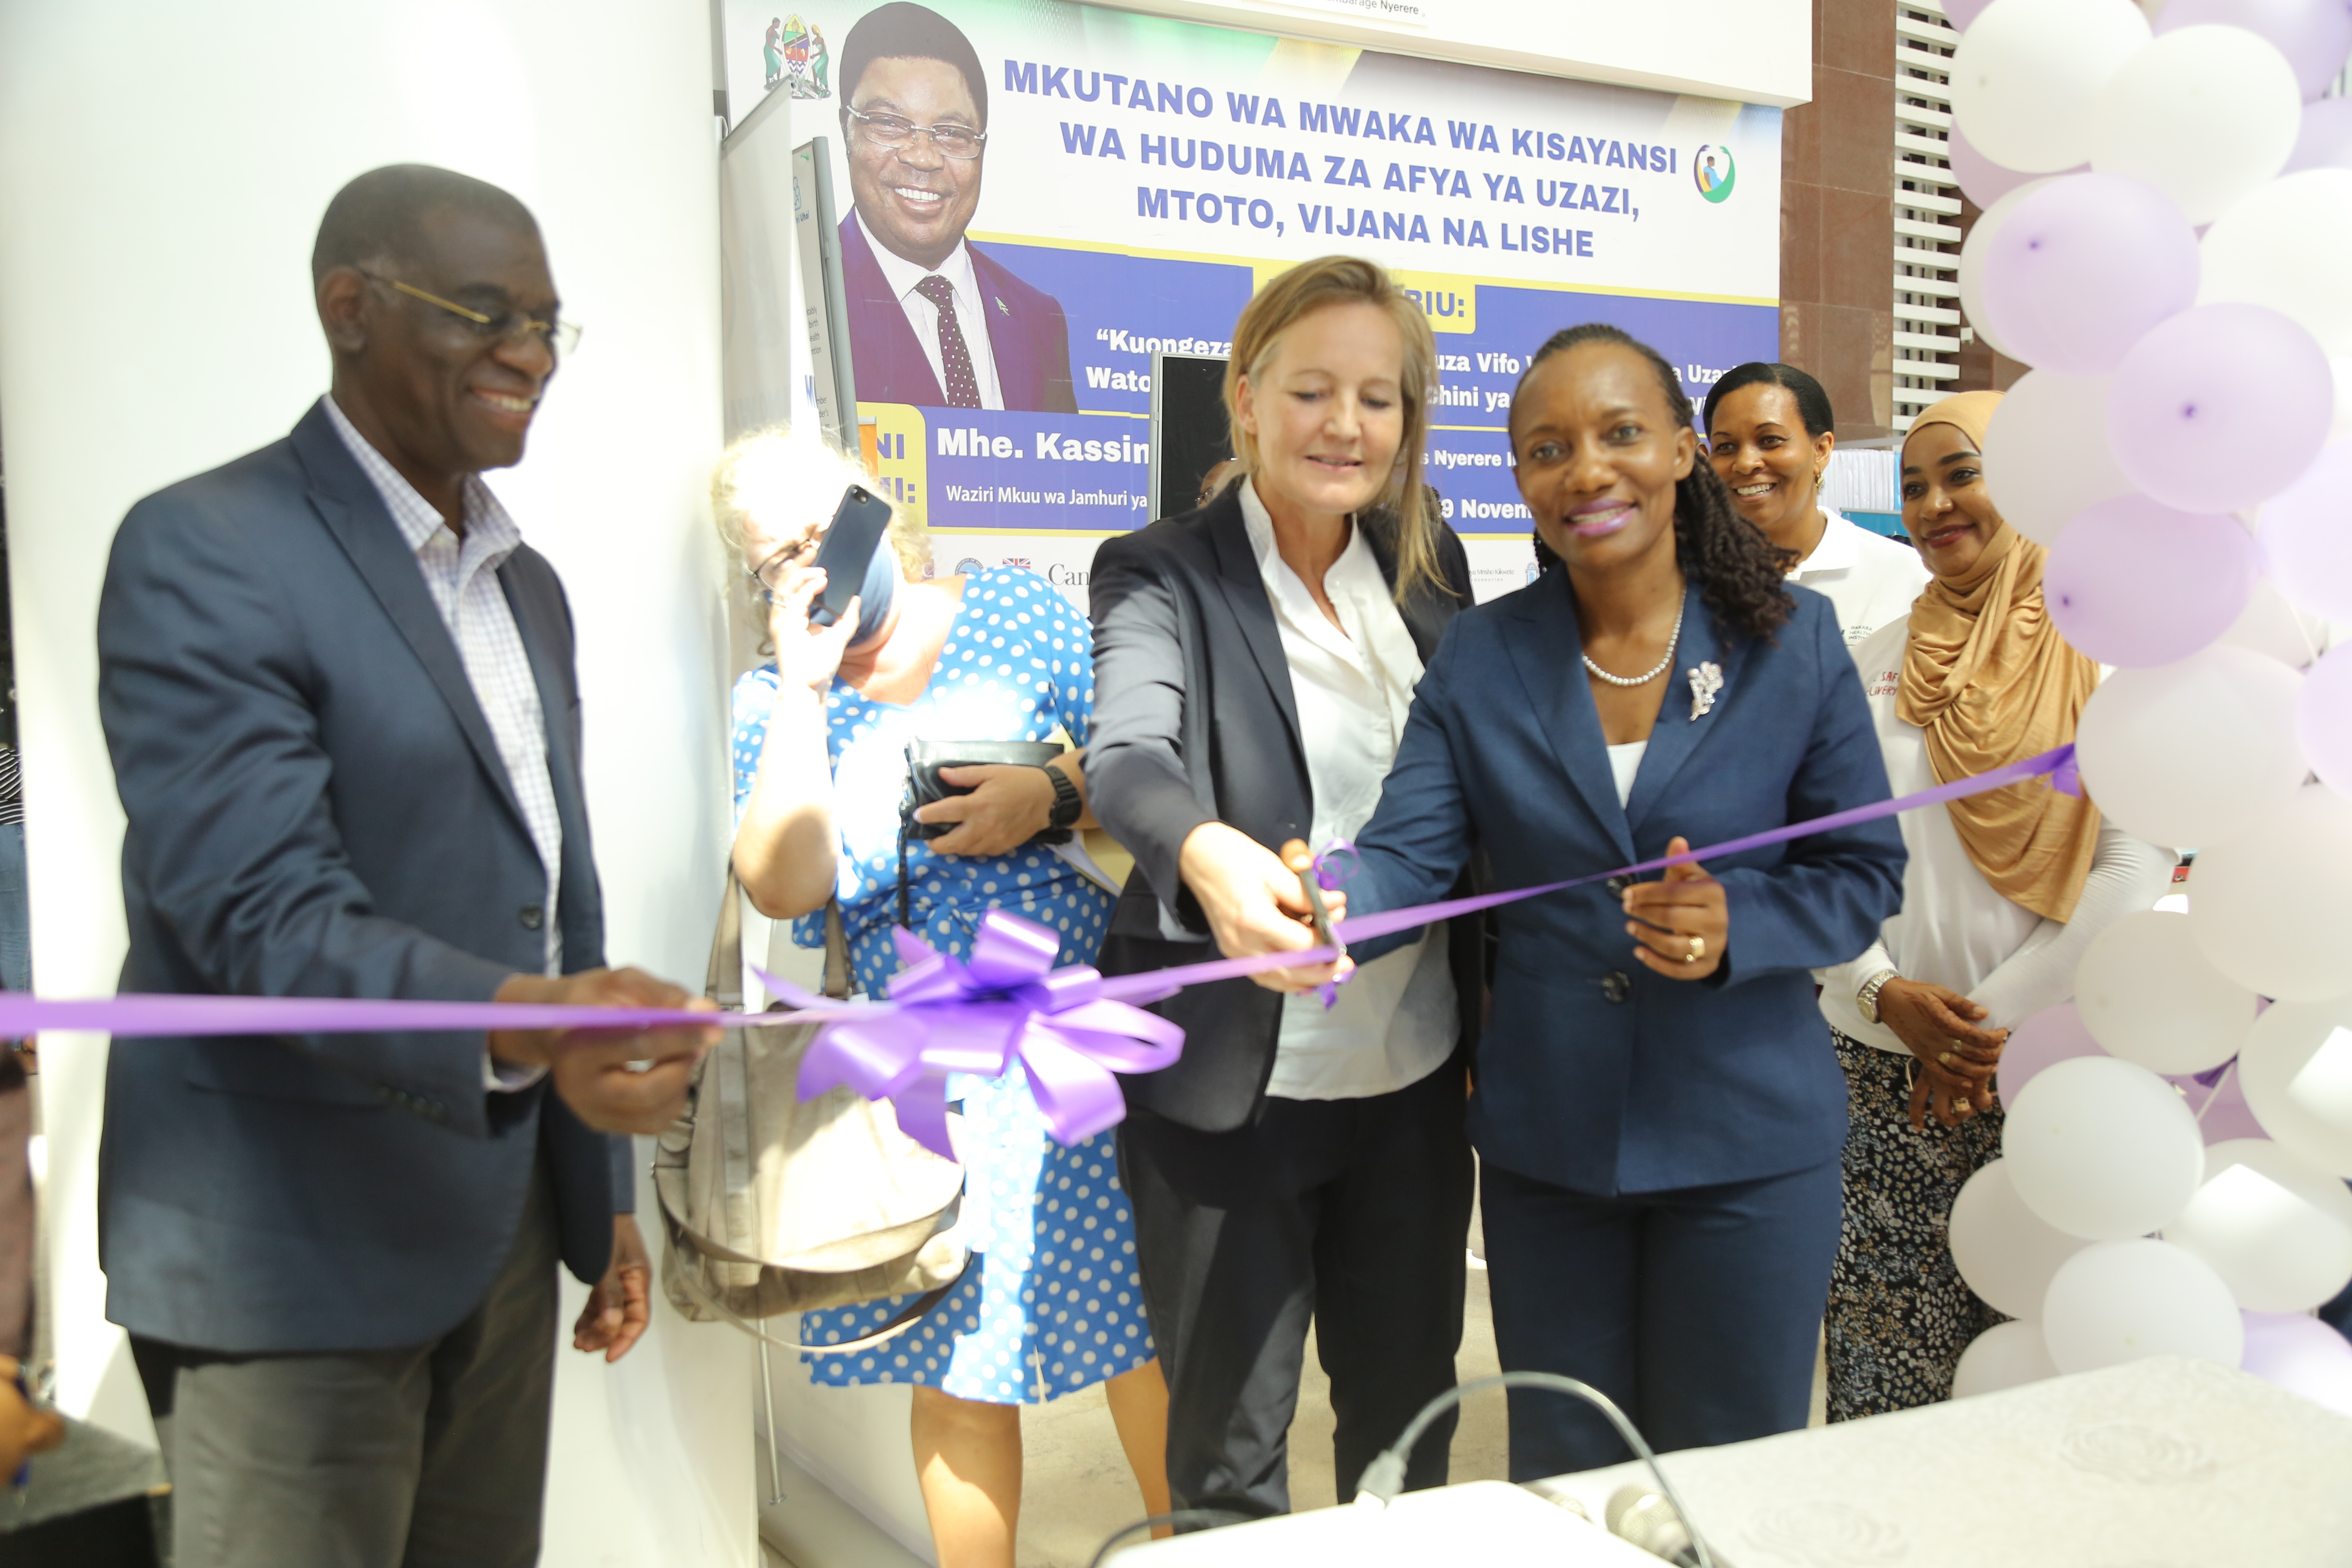 LAUNCH: New Swahili App for healthcare workers unveiled in Dar